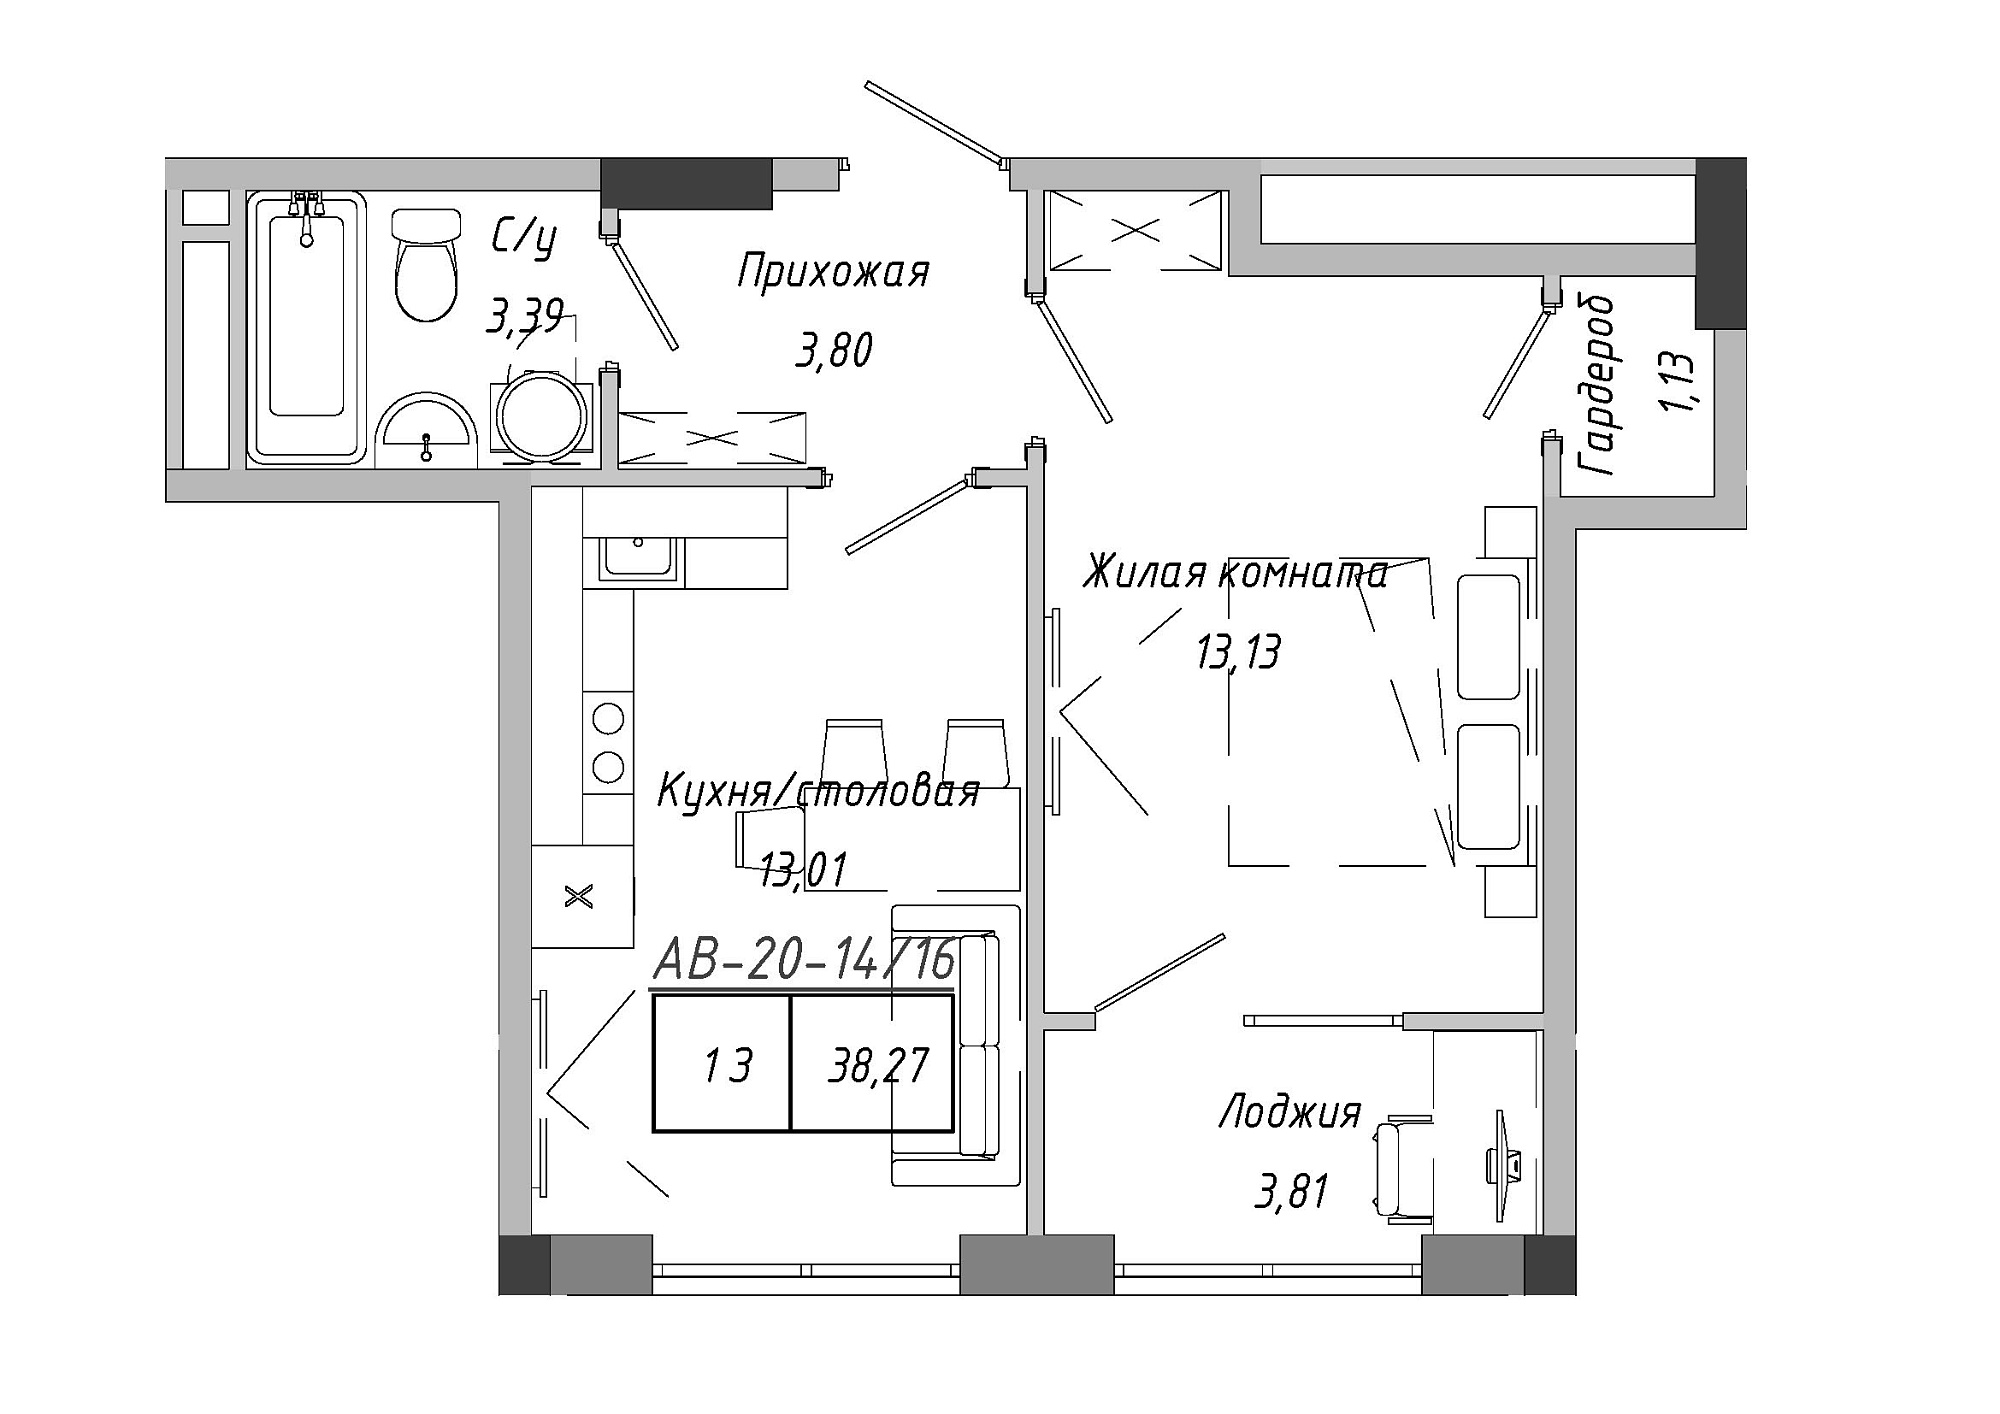 Planning 1-rm flats area 38.27m2, AB-20-14/00116.